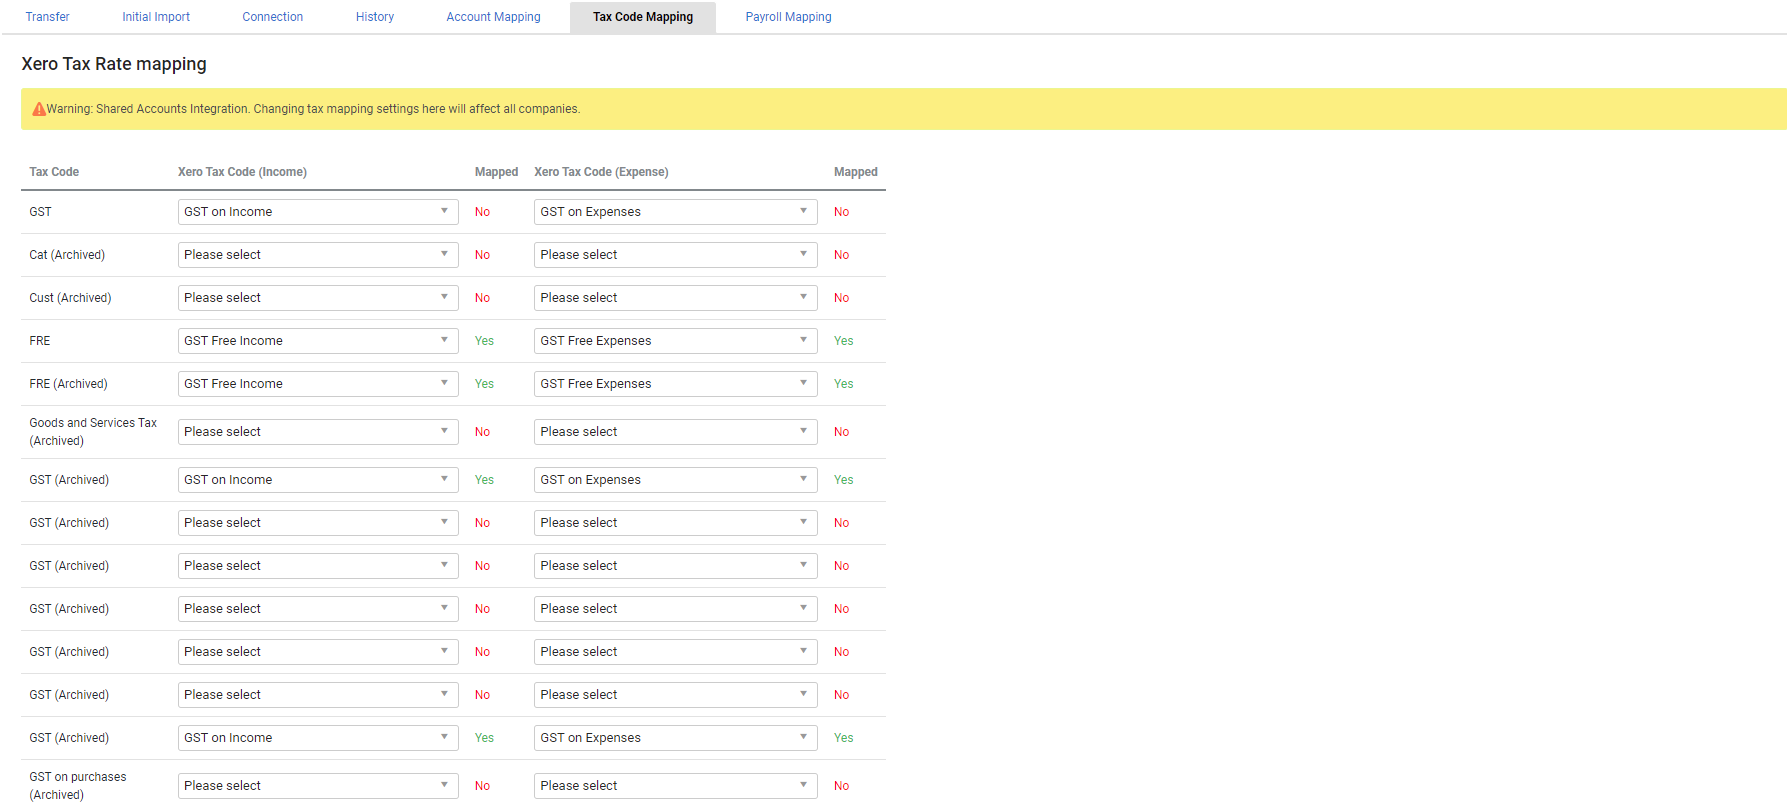 A screenshot of the Tax Code Mapping tab.